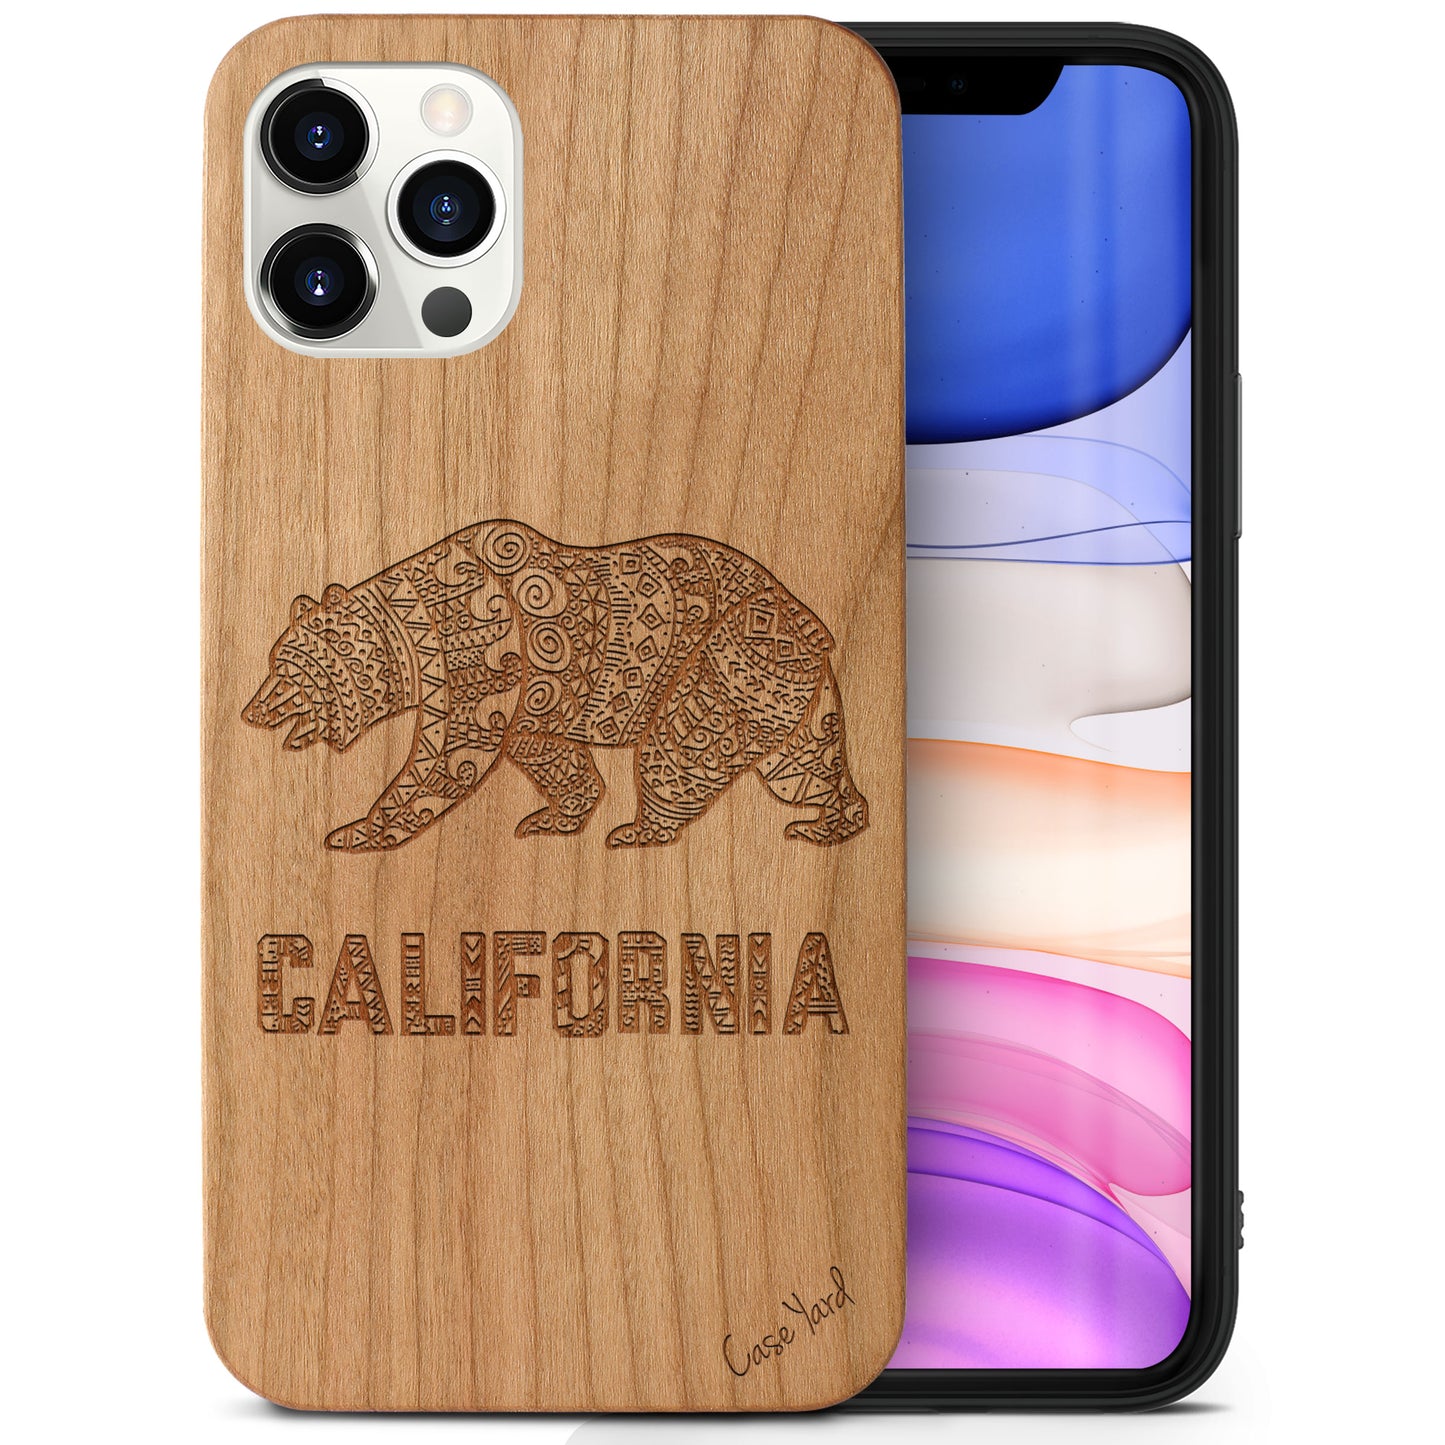 Wooden Cell Phone Case Cover, Laser Engraved case for iPhone & Samsung phone California Grizzly Design